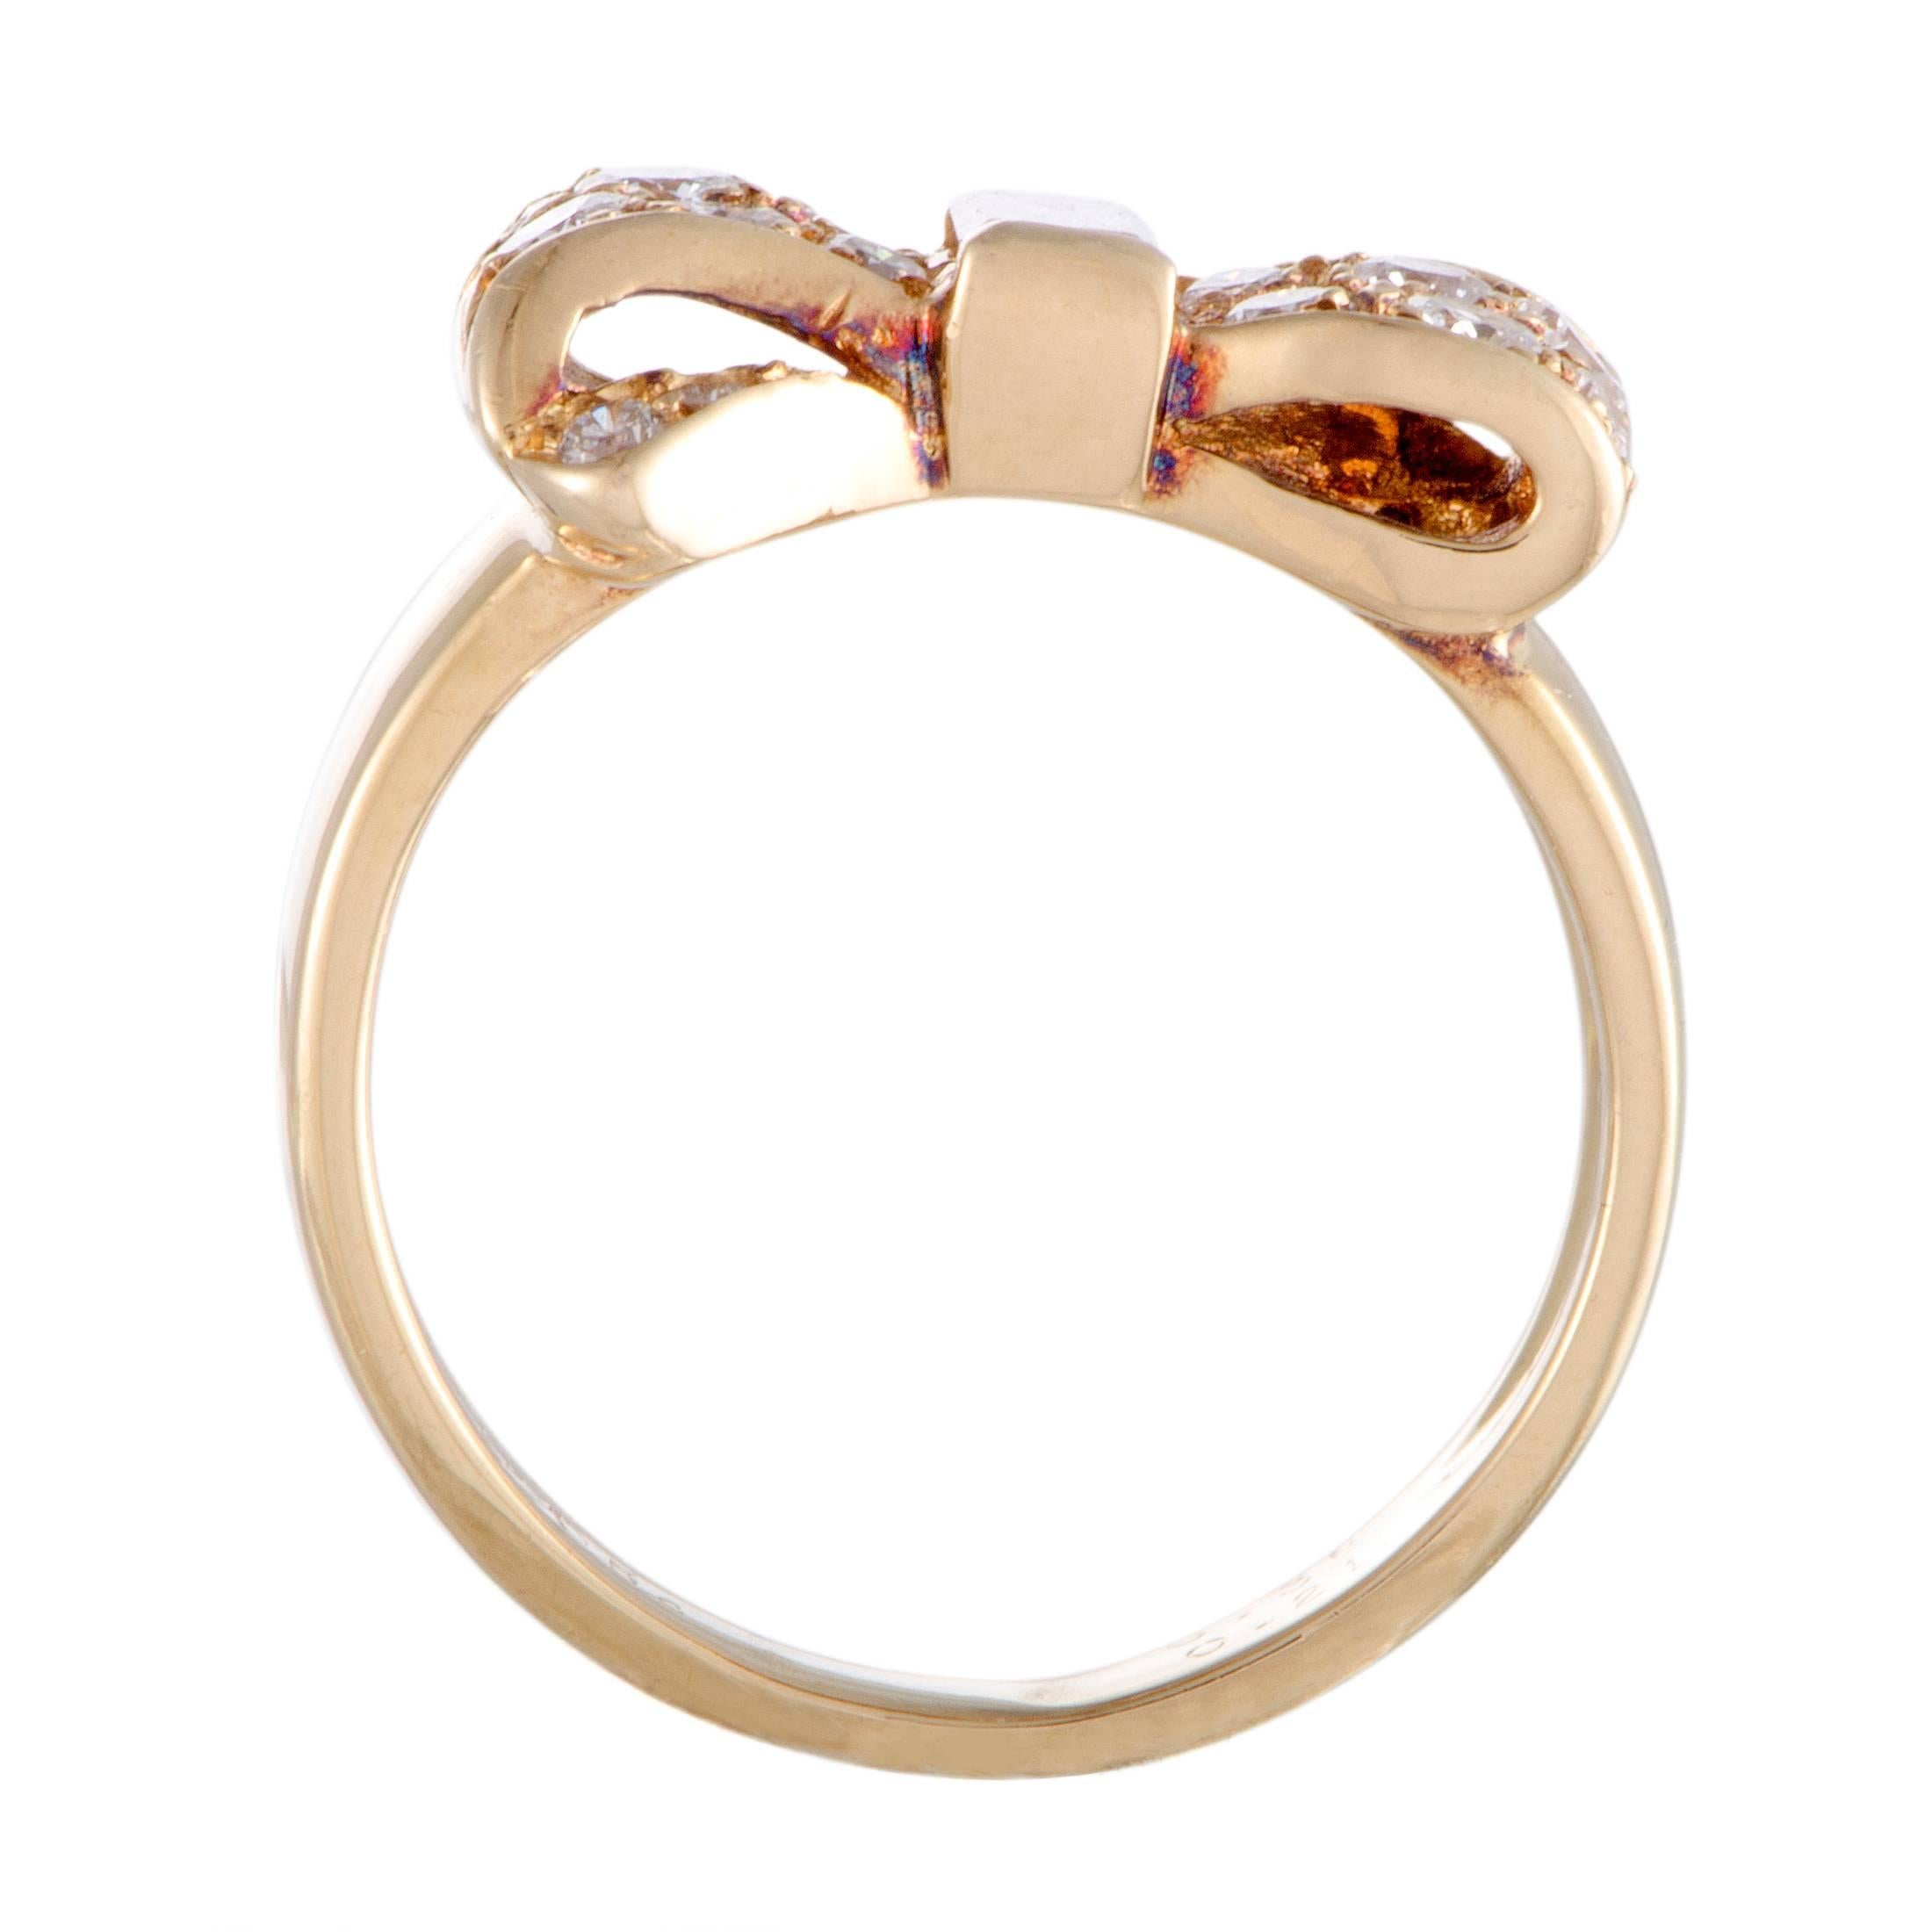 The brand’s distinctive style and demanding standards of quality are perfectly embodied in this gracefully elegant and adorably feminine ring from Van Cleef & Arpels where the gorgeous motif of a bow is presented in 18K yellow gold and glistening